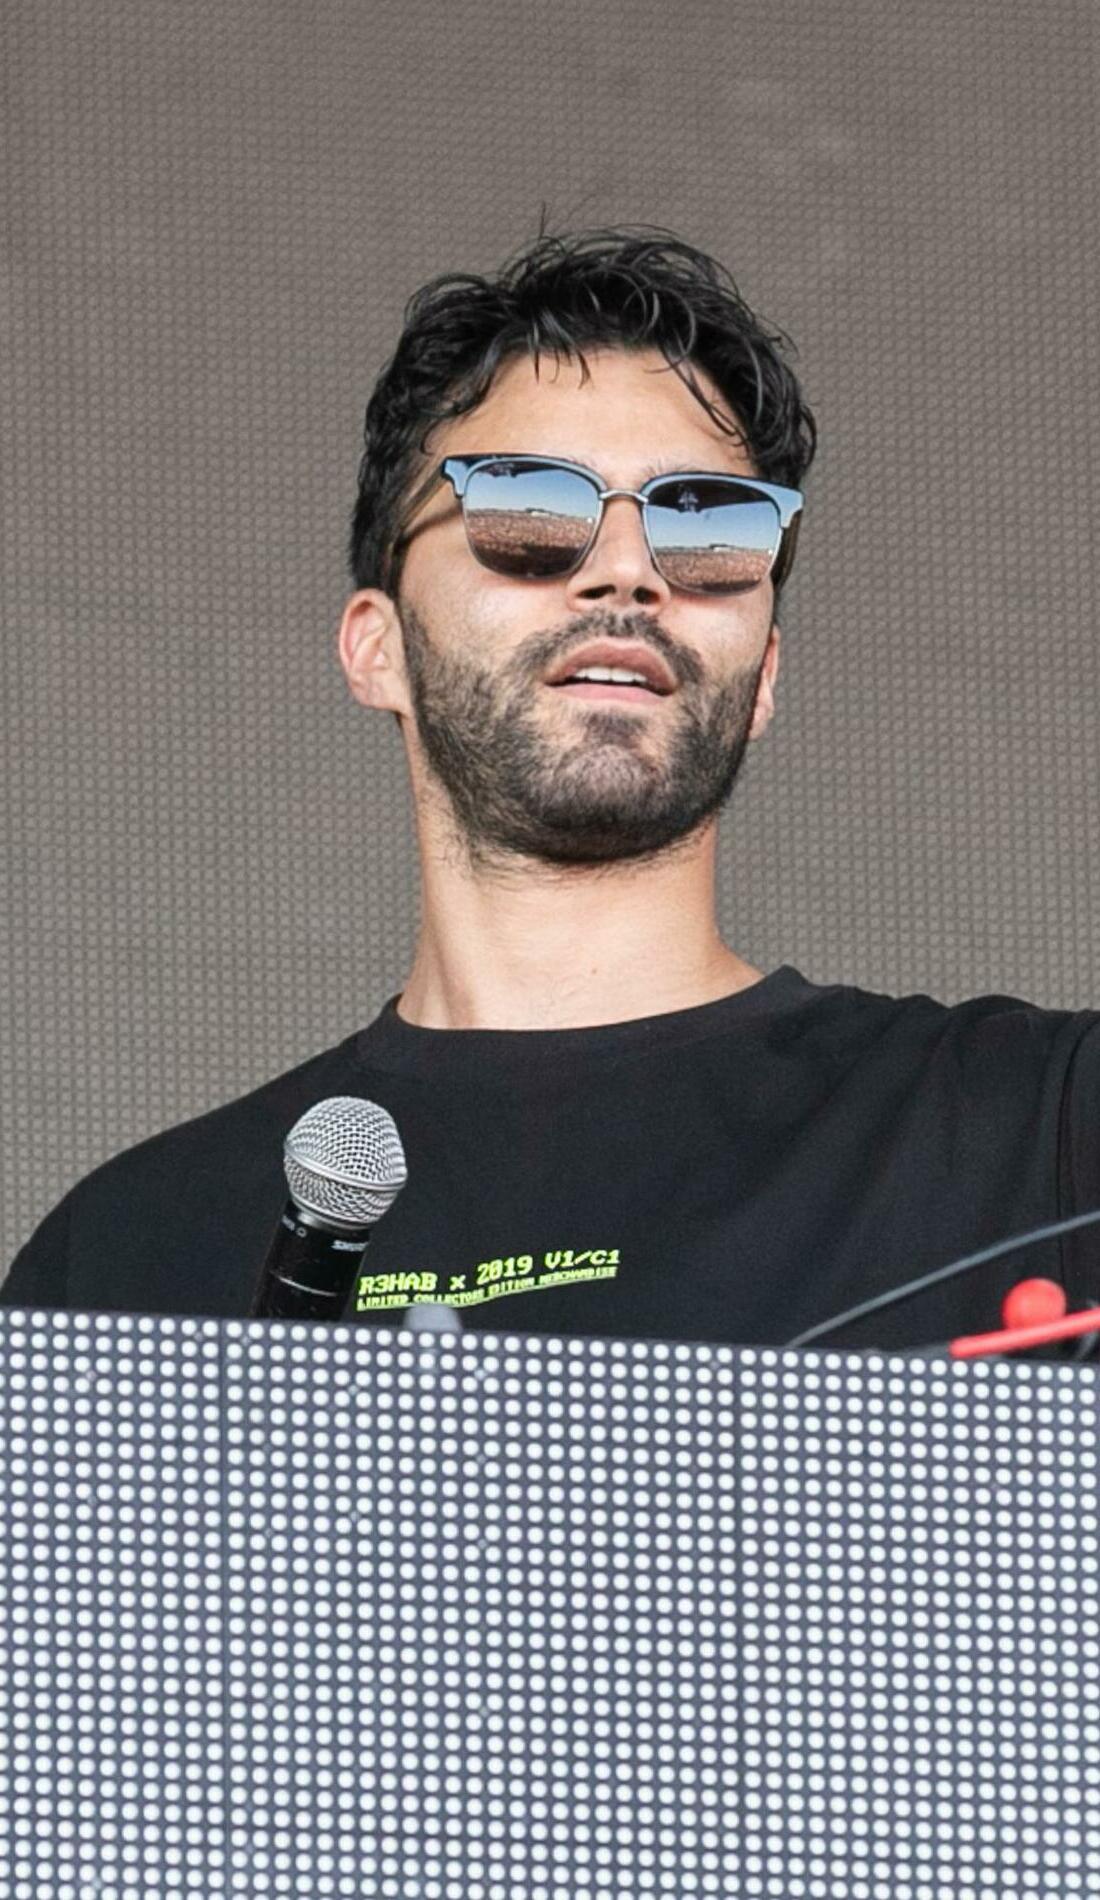 A R3hab live event